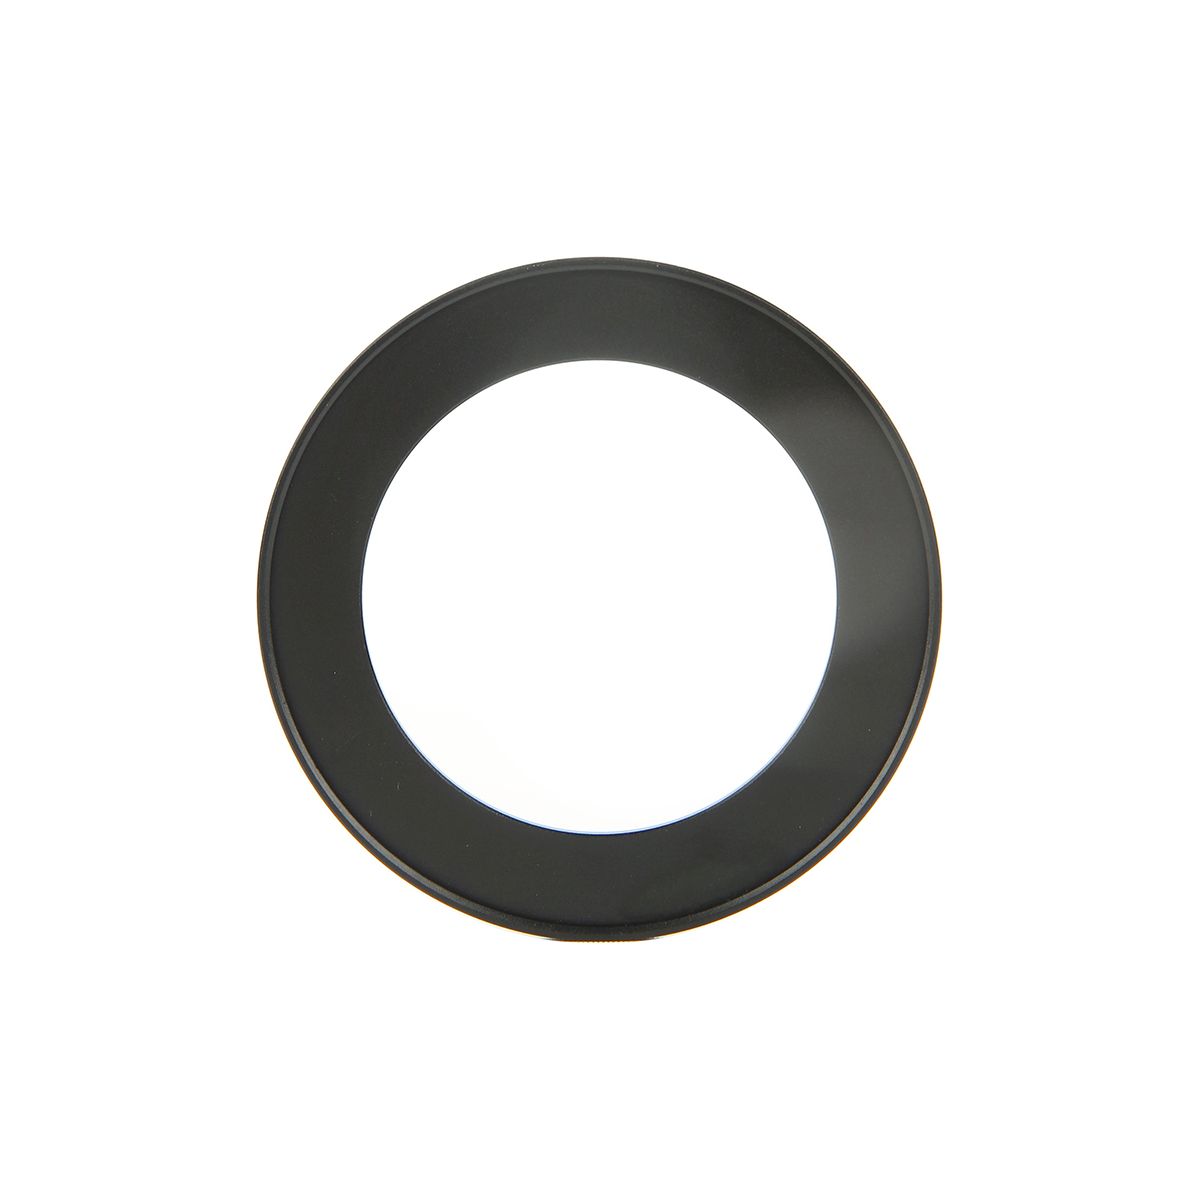 Caruba Step-up/down Ring 33.5mm - 49mm